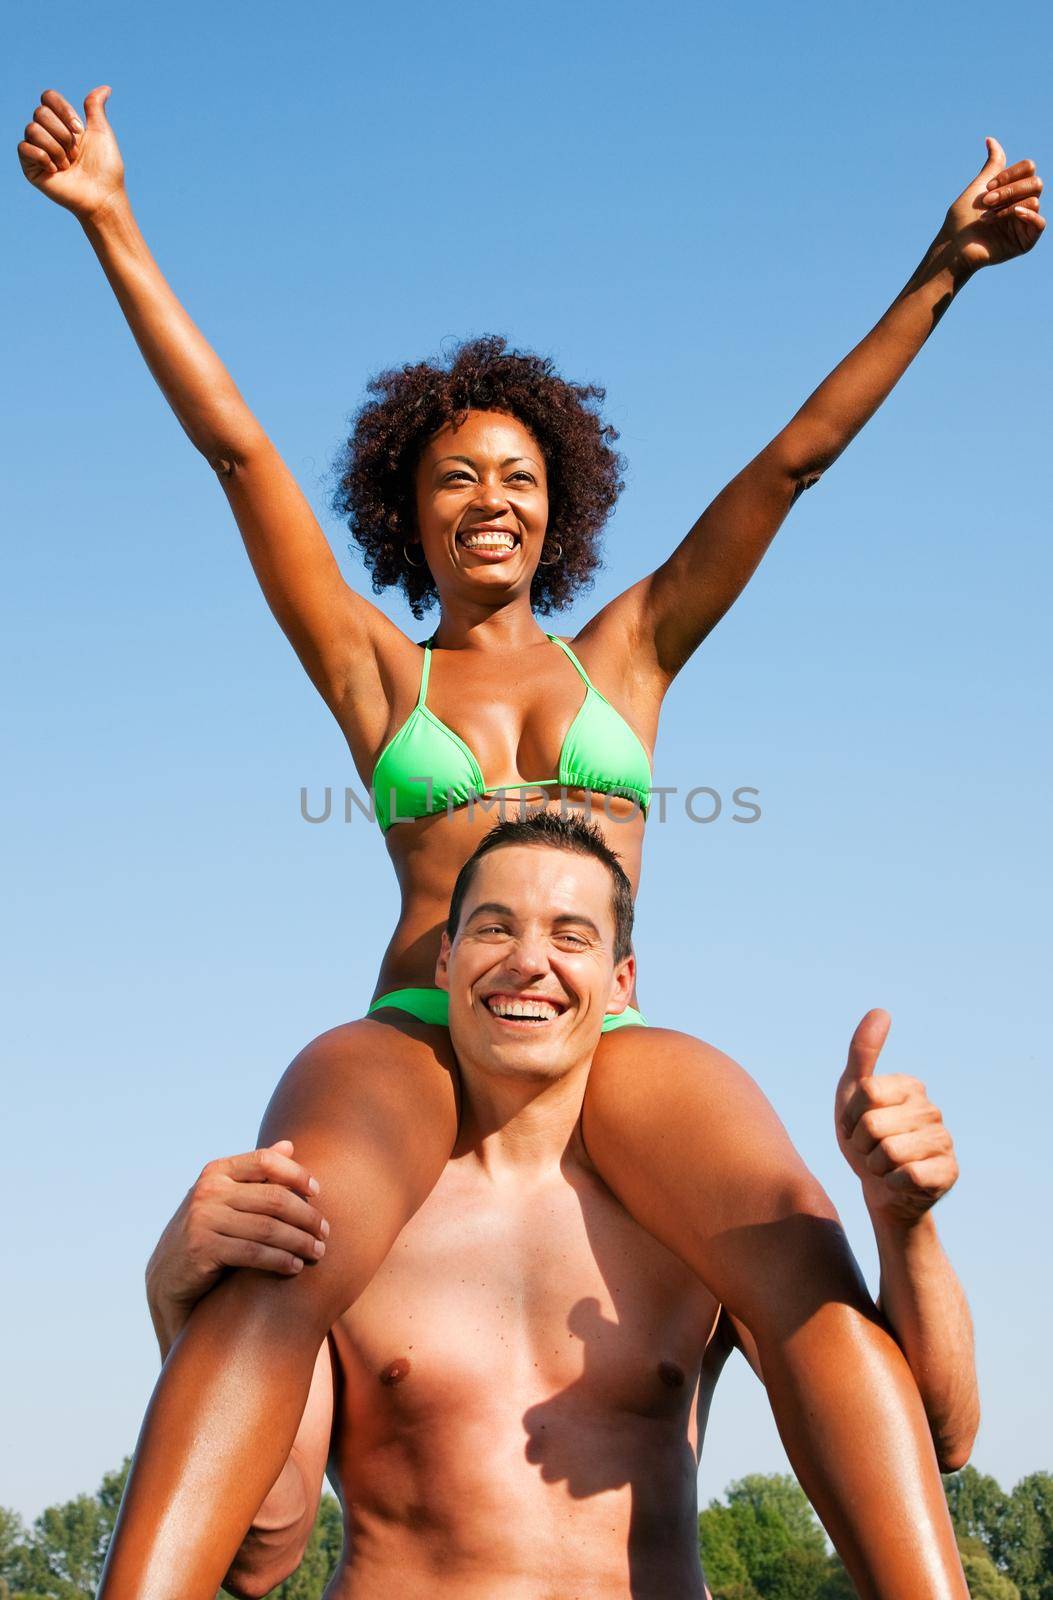 Couple in love - Woman of color in bikini sitting on her man’s shoulders under blue sky - summer and fun